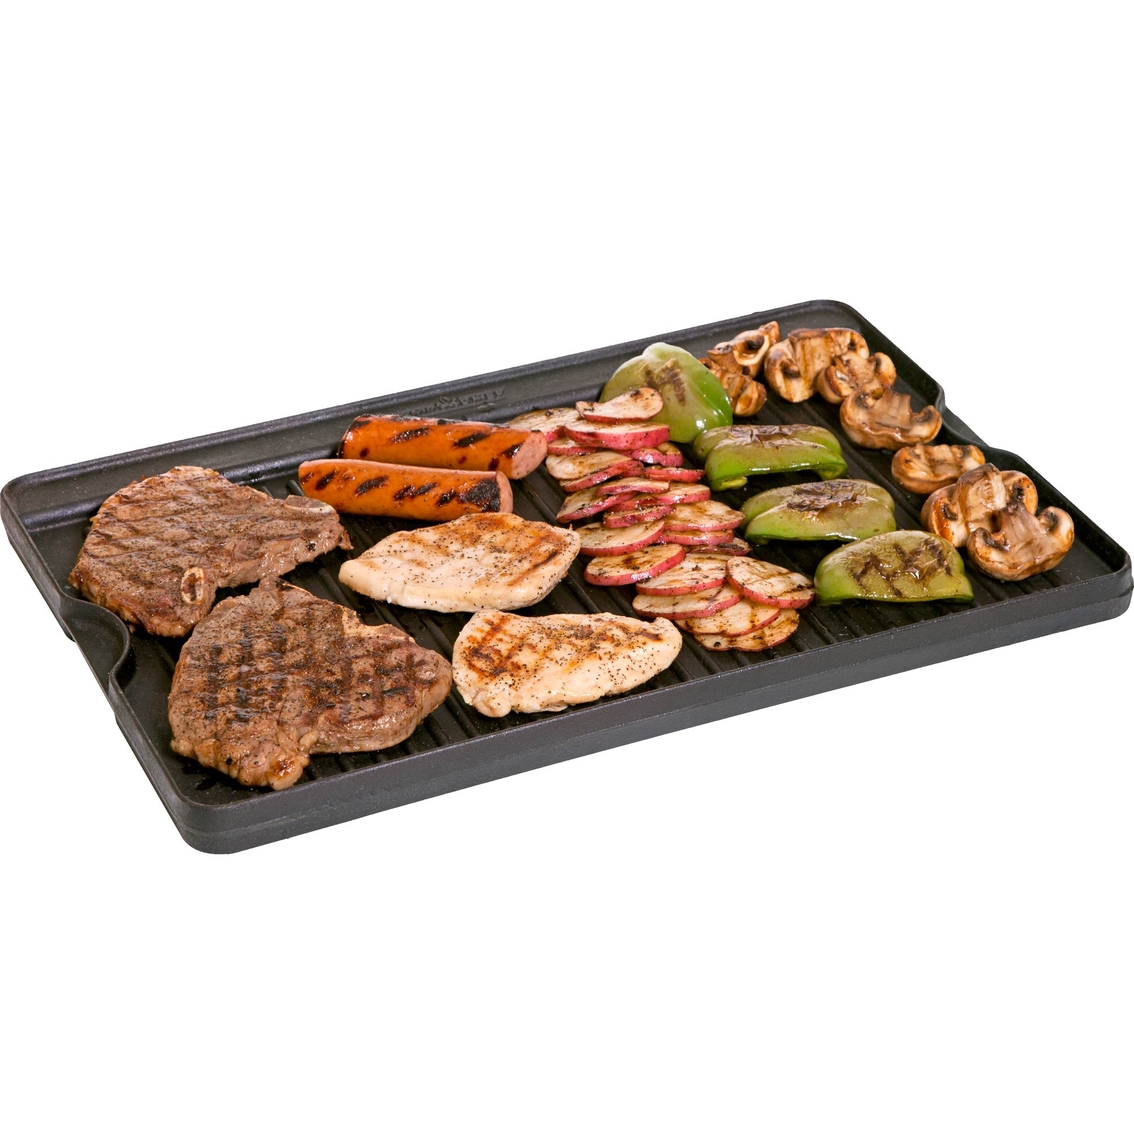 Camp Chef Reversible Grill/Griddle 24 in. - Image 3 of 4